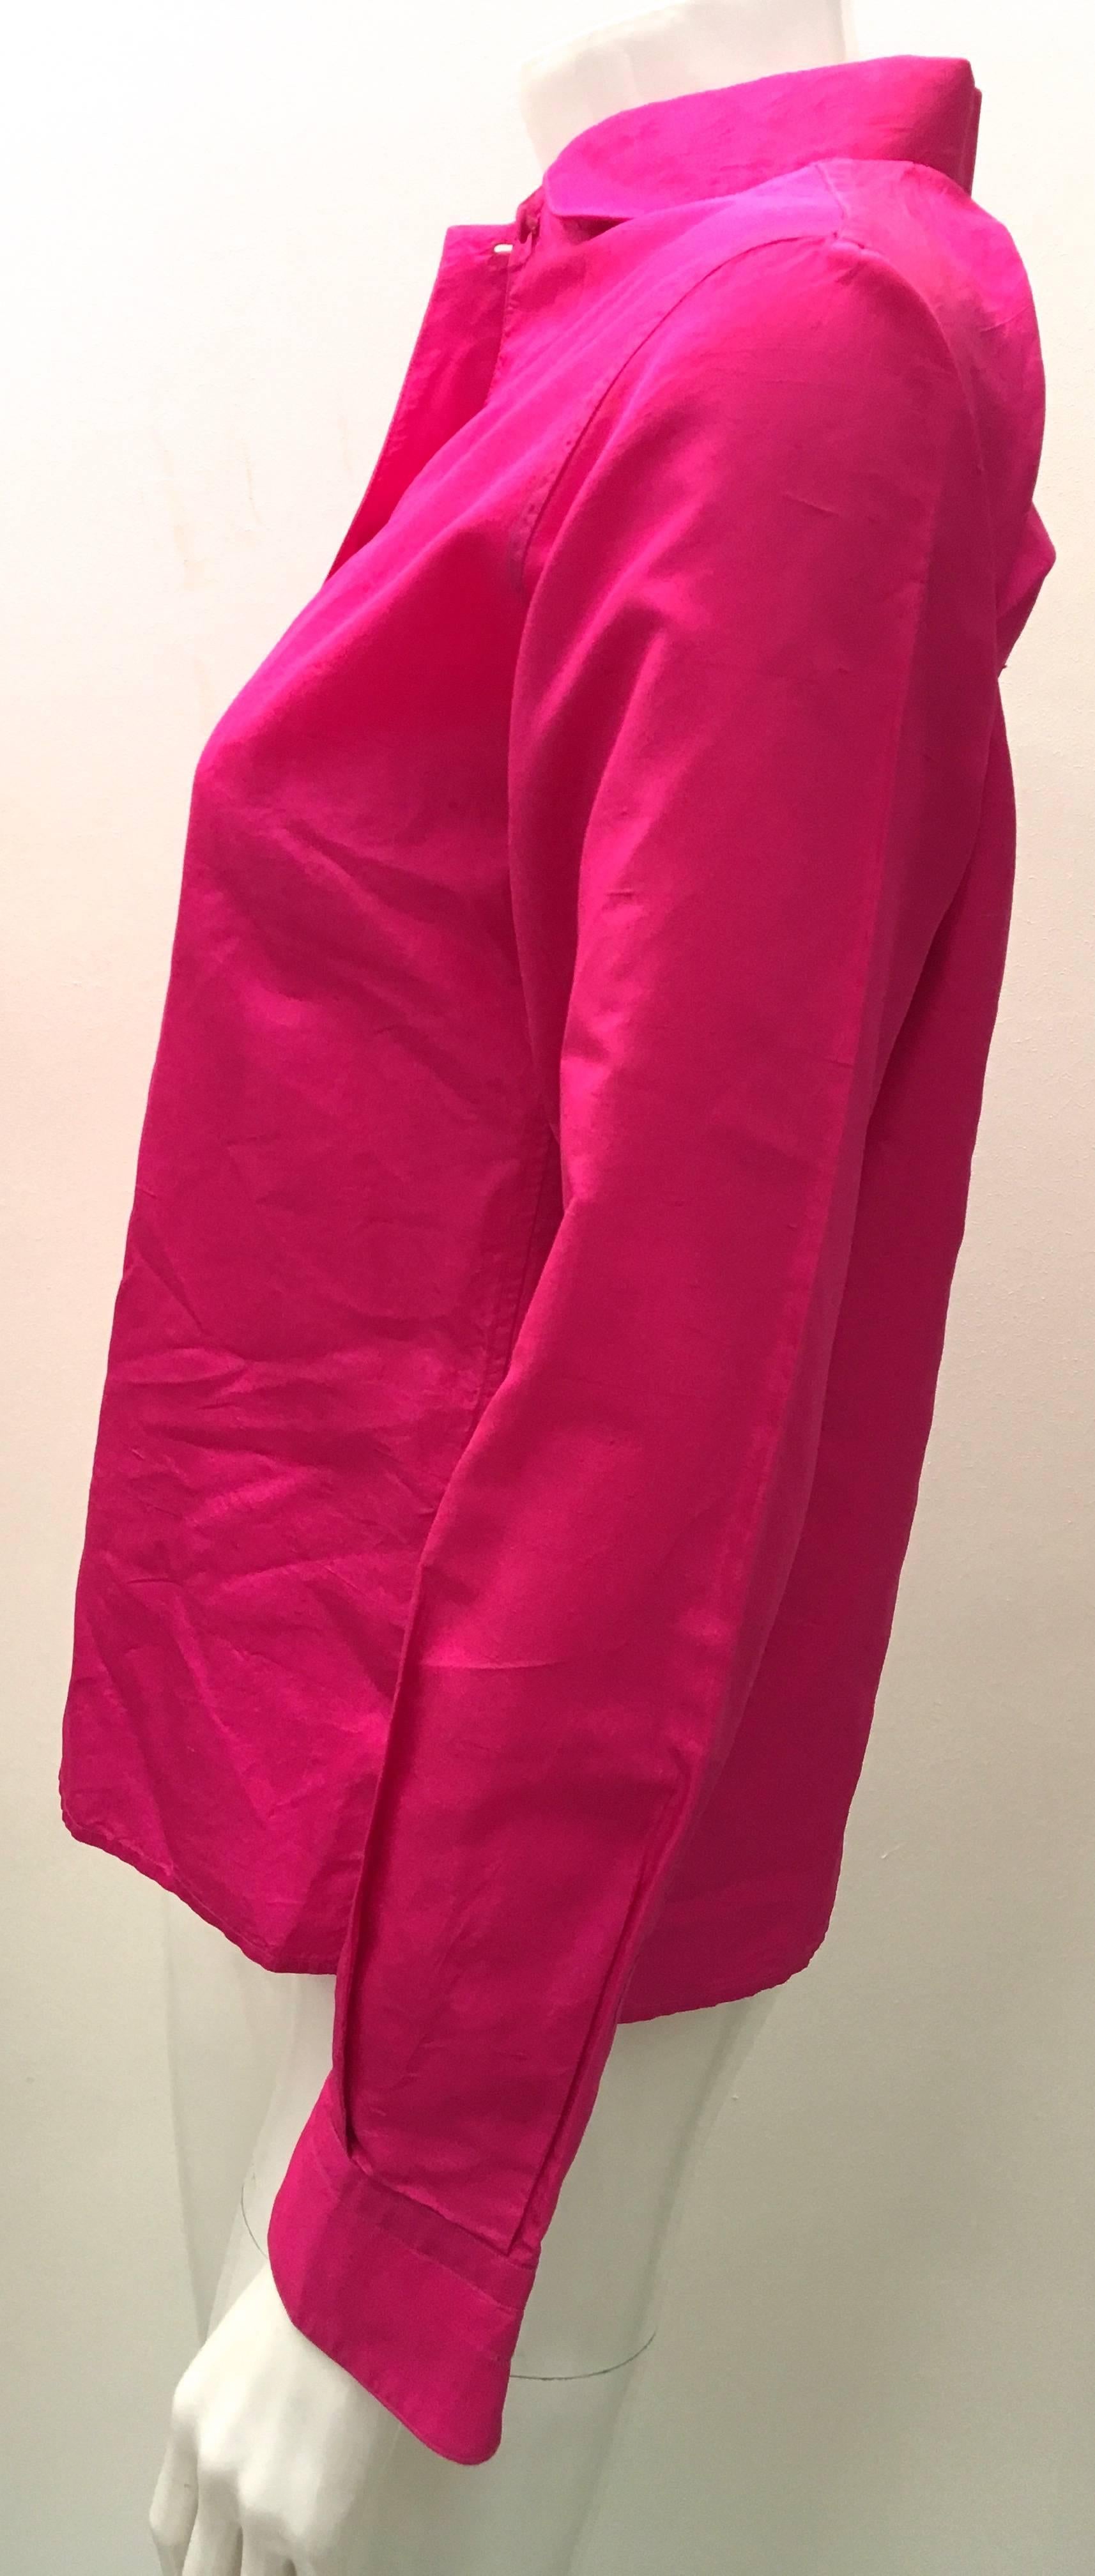 Presented here is a beautiful silk magenta blouse from Emilio Pucci. The blouse is from the 1960's and is a size 8 from that era. Fits like a size 2. The blouse is a solid silk magenta throughout the blouse and has buttons covered in magenta fabric